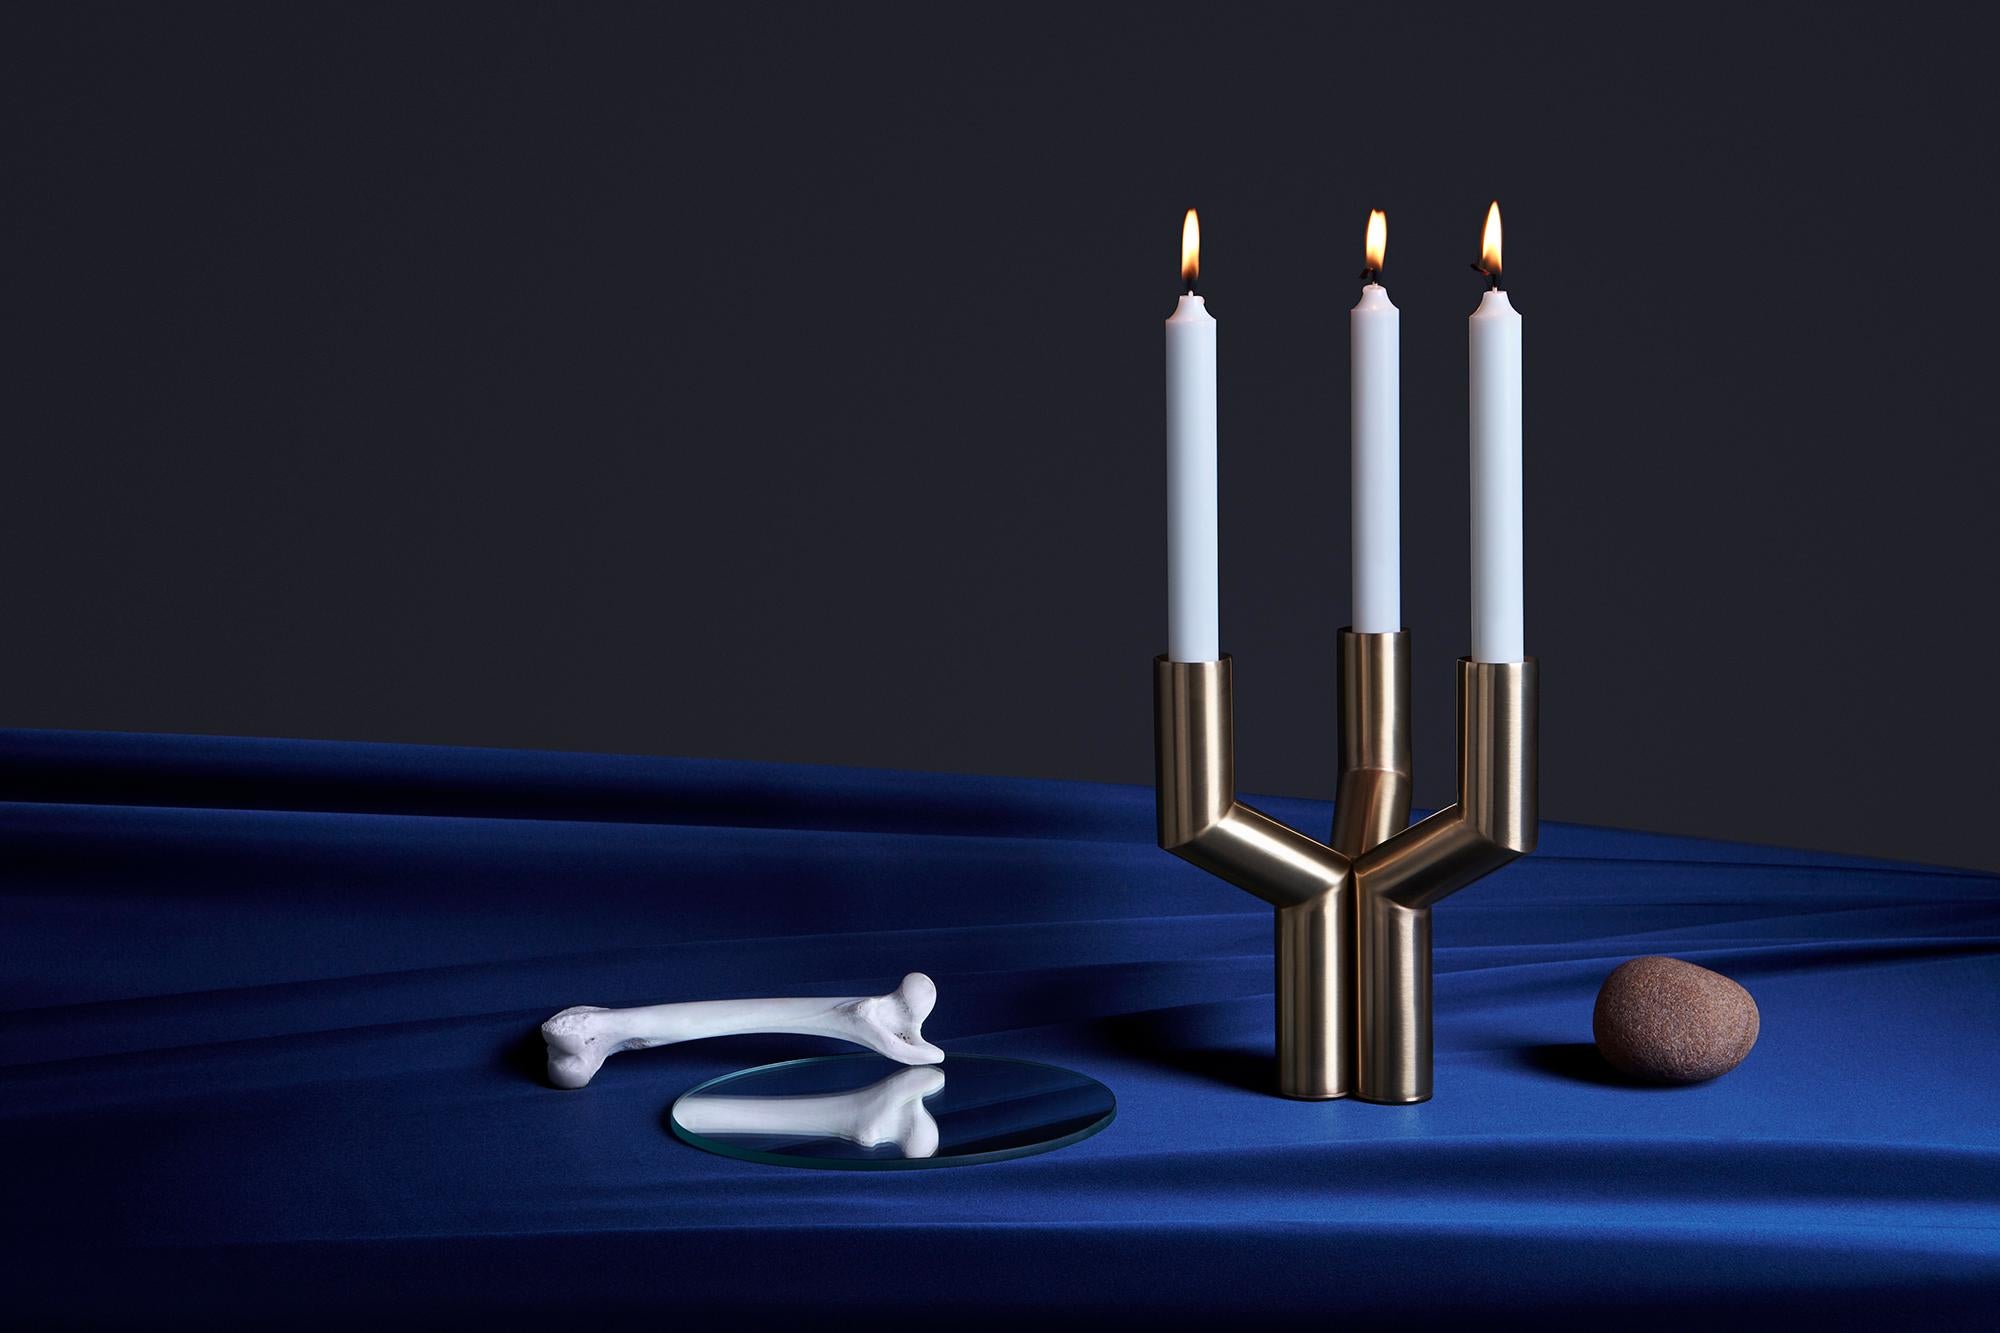 The Sermon candle holder, first released in 2021, celebrates Brutalist aesthetics and comes in two different finishes.
The solid metal candle holder has been envisioned as an austere ritual artefact, a quality that lends it its name. It consists of